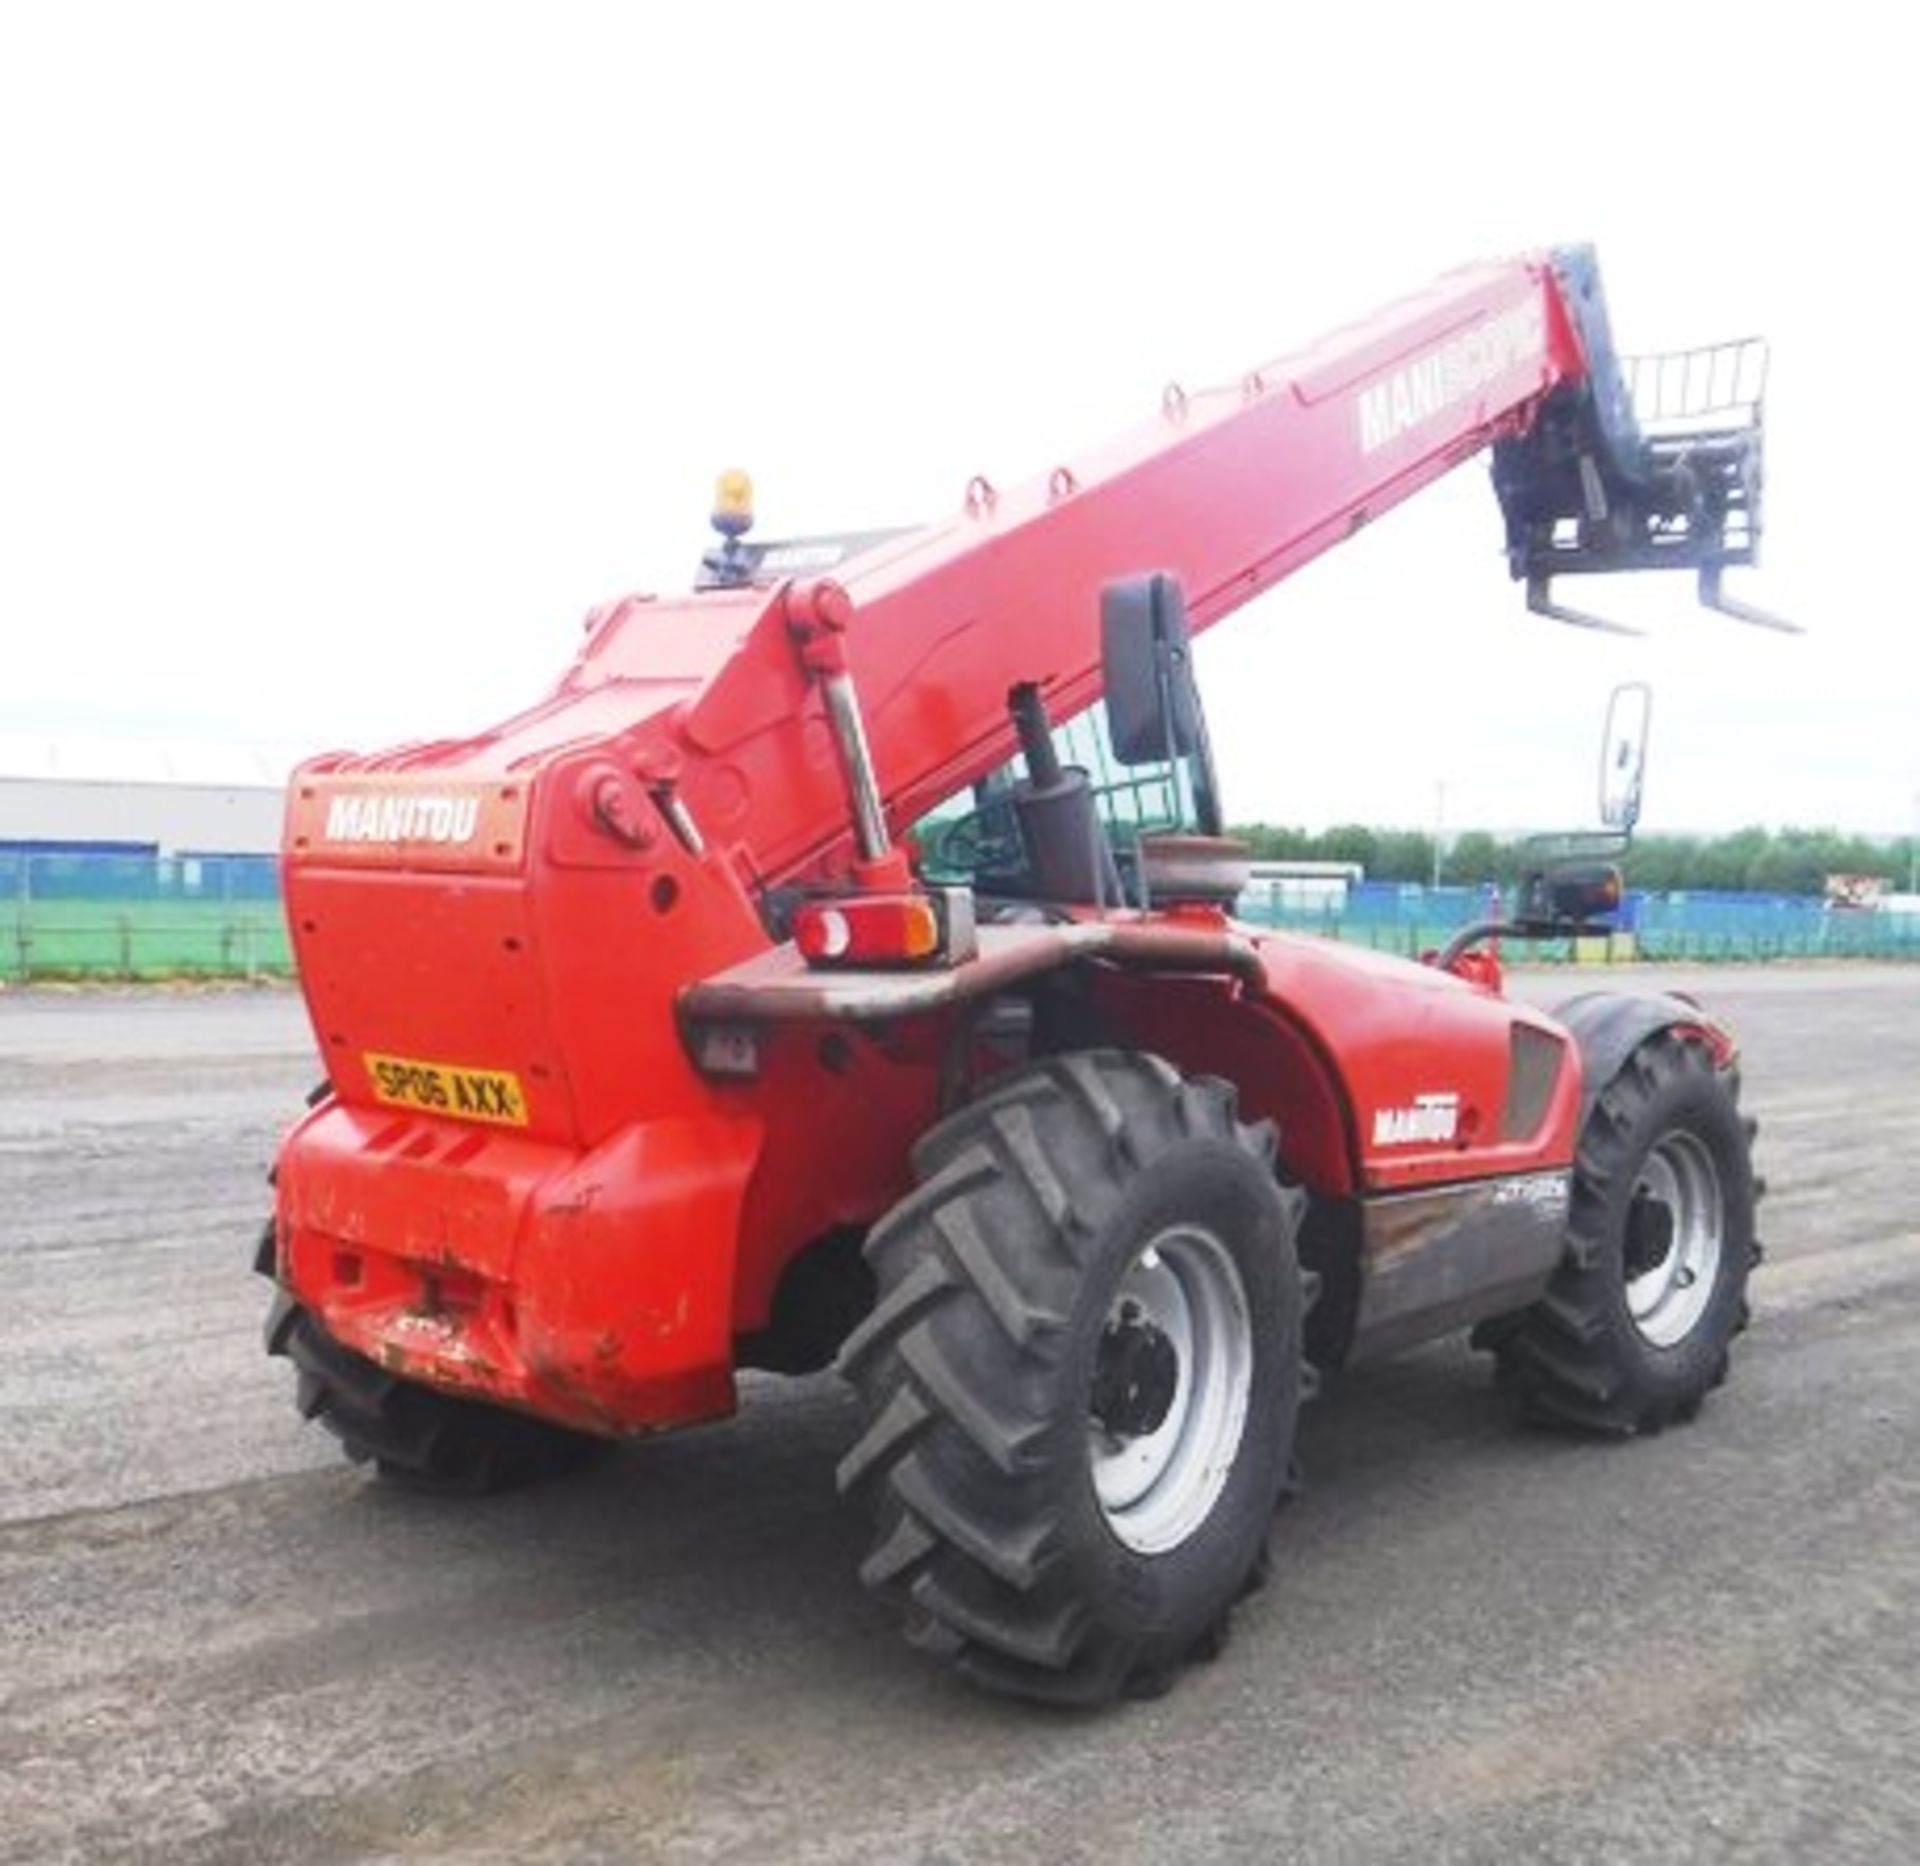 2006 MANITOU 14/35 TELEHANDLER c/w bucket & forks s/n 1230044 Reg no SP06 AXX 2646hrs (not verified) - Image 16 of 31